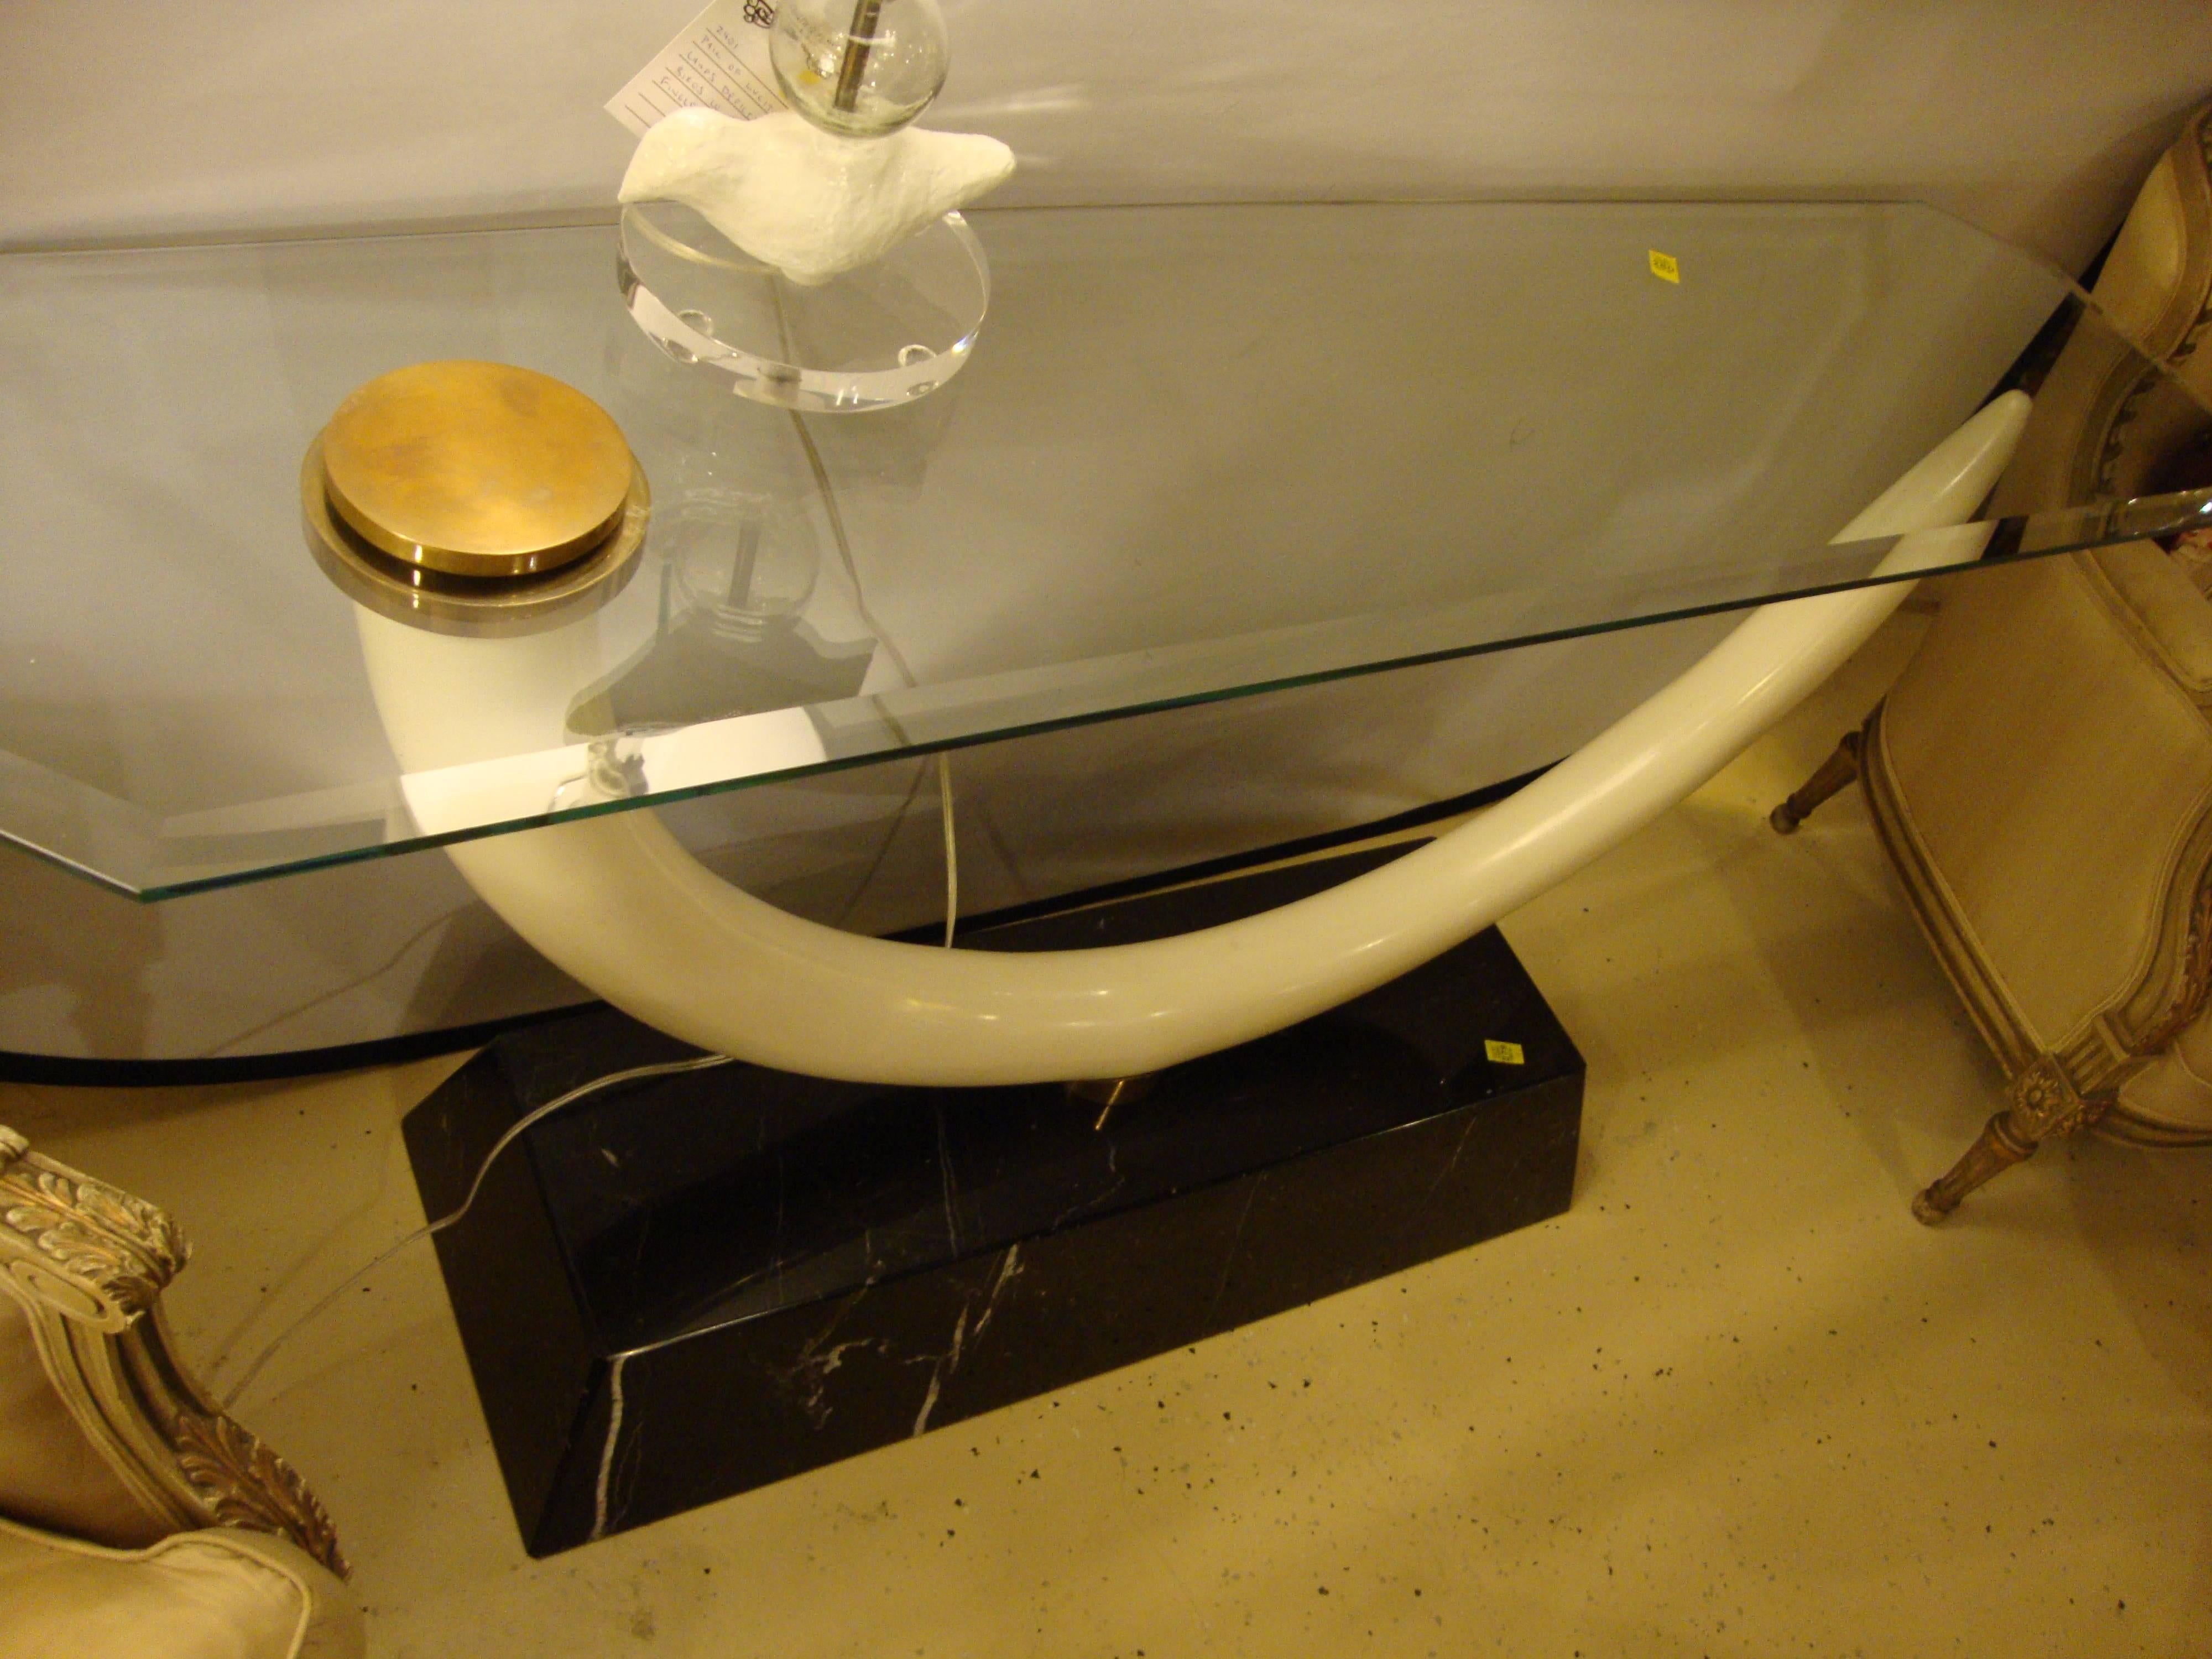 Elephant tusk glass top and marble based console table. Very clean and sharp.